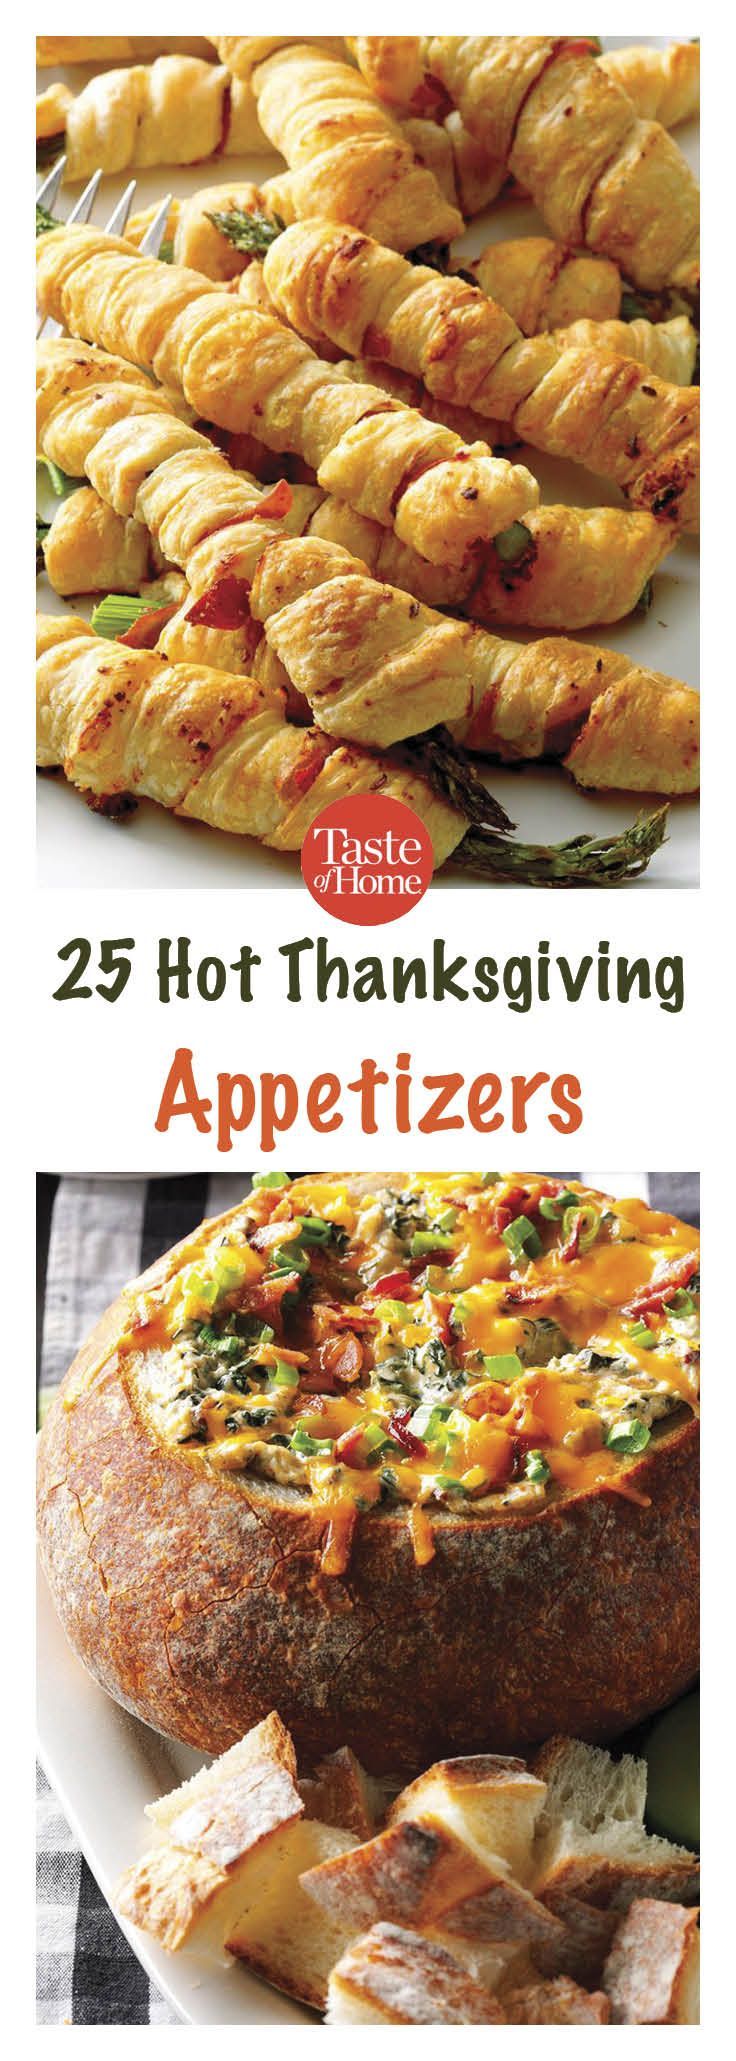 25 Hot Thanksgiving Appetizers -   14 thanksgiving appetizers ideas